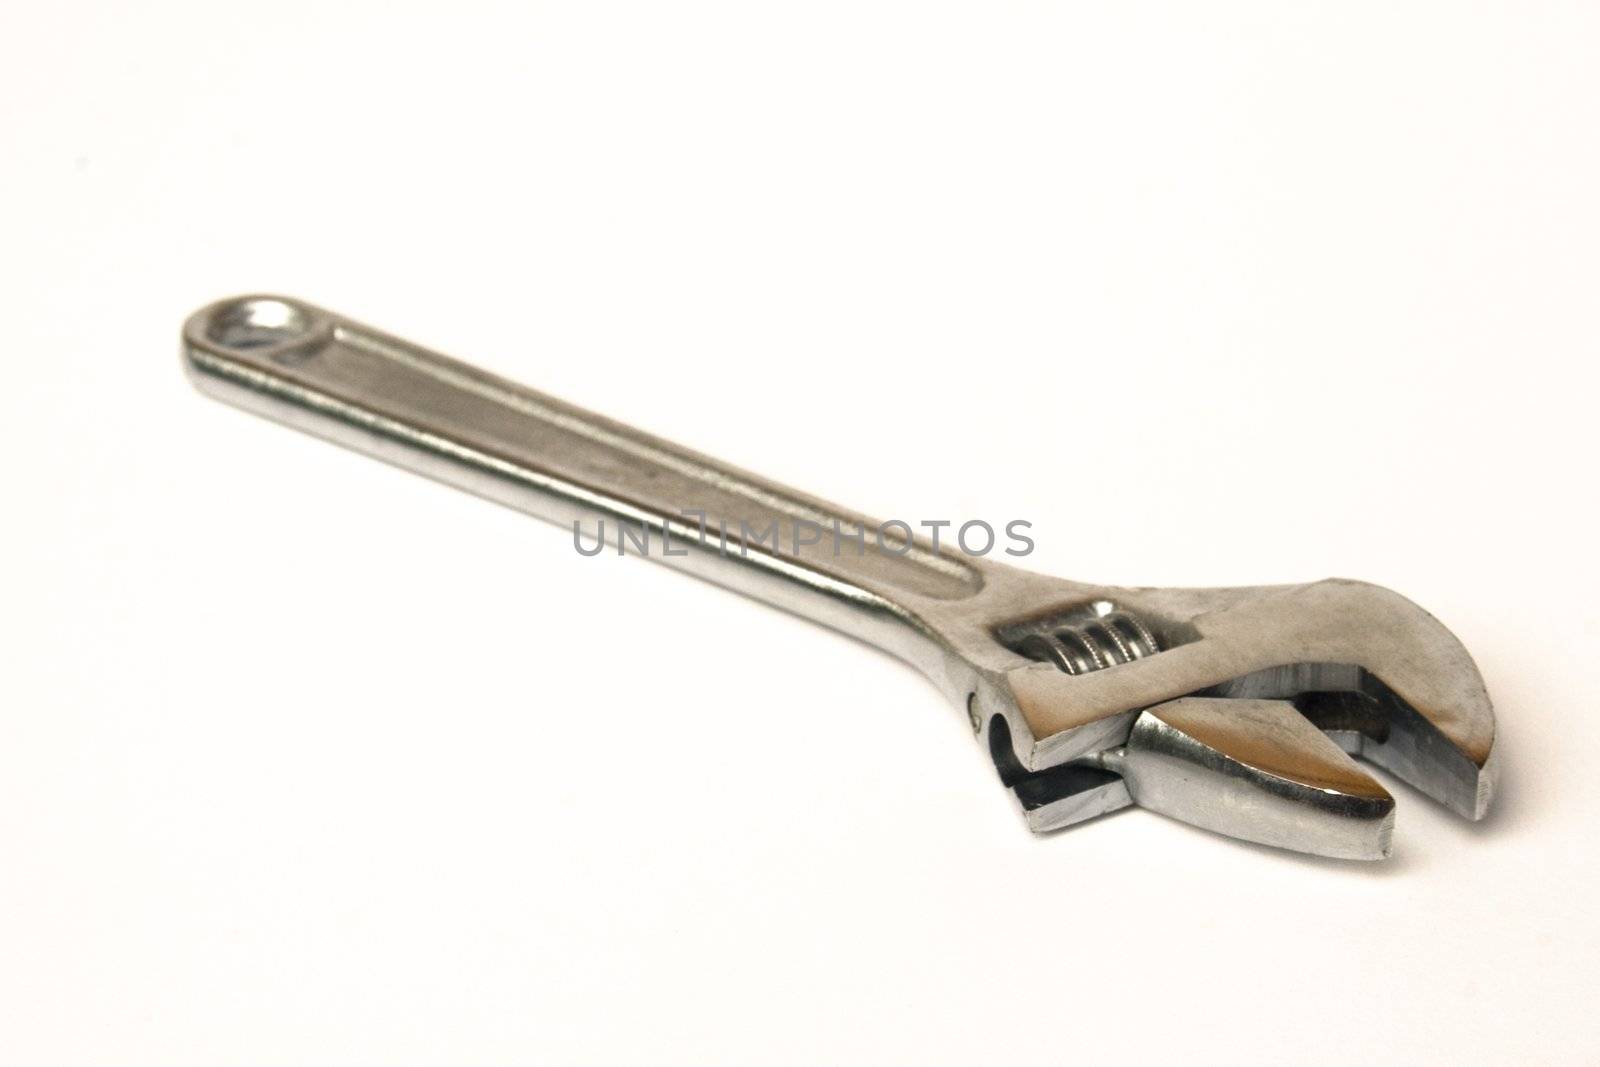 Standard chromed crescent wrench isolated against white background